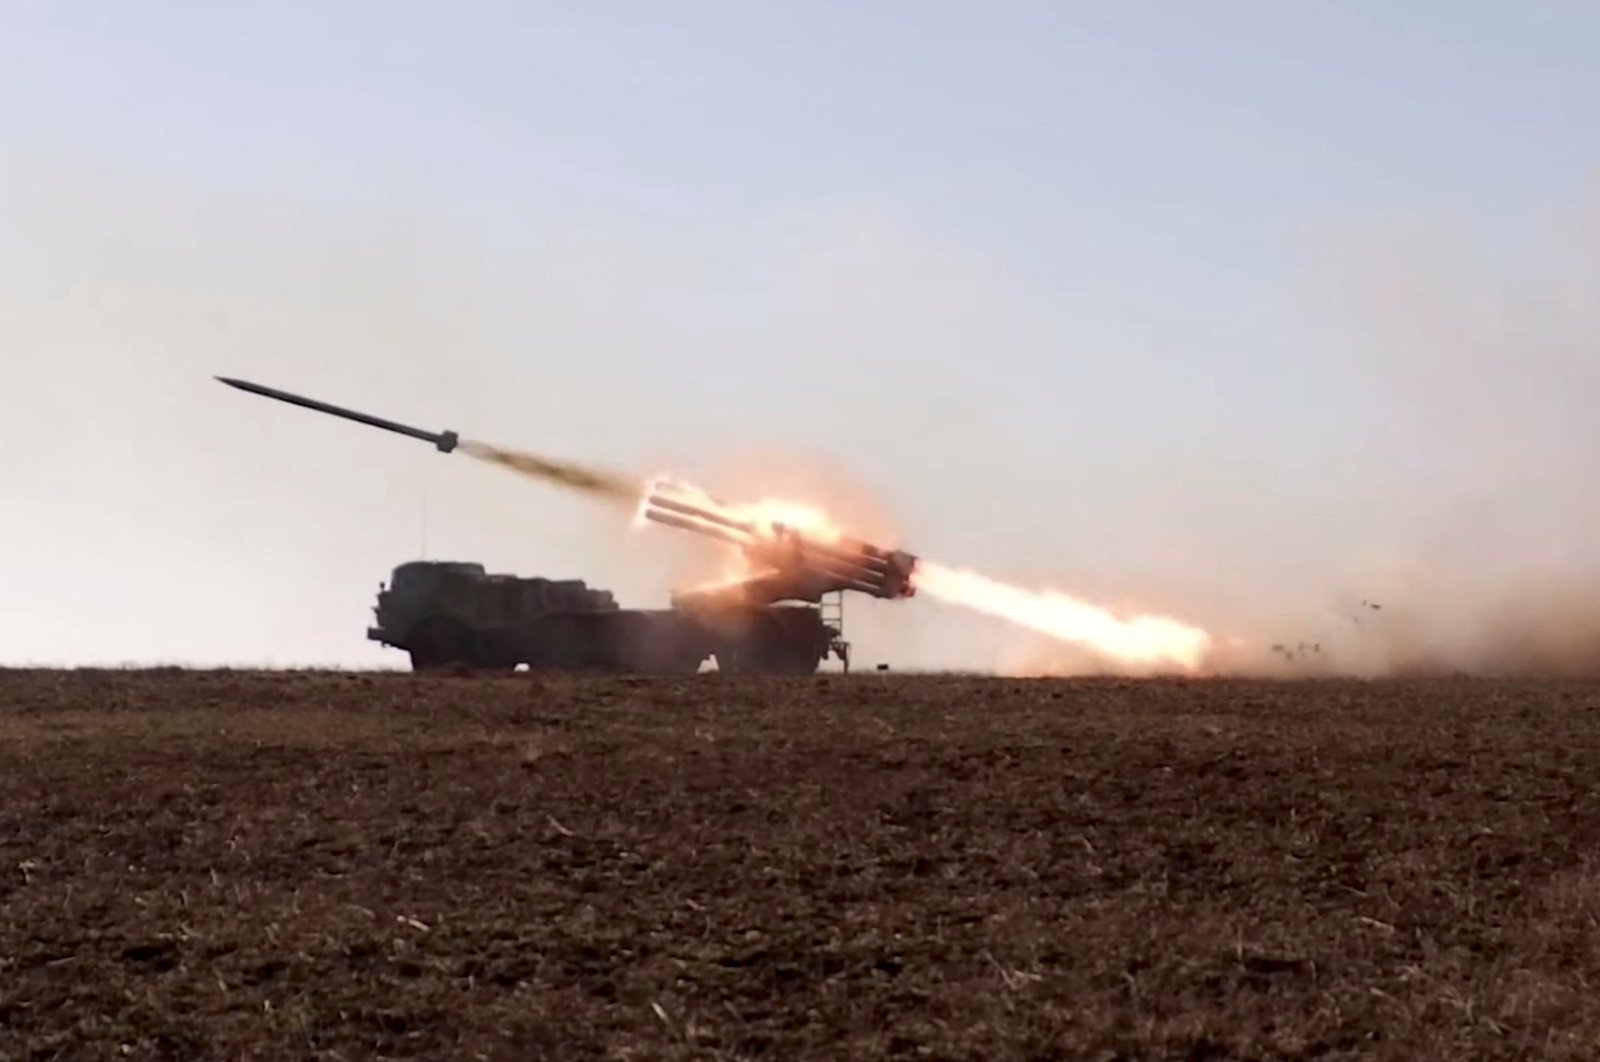 A Russian self-propelled multiple rocket launcher system launches a rocket during military exercises at the Opuk training area in Crimea, in this still image taken from a handout video released Feb. 15, 2022. (Russian Defense Ministry via Reuters)